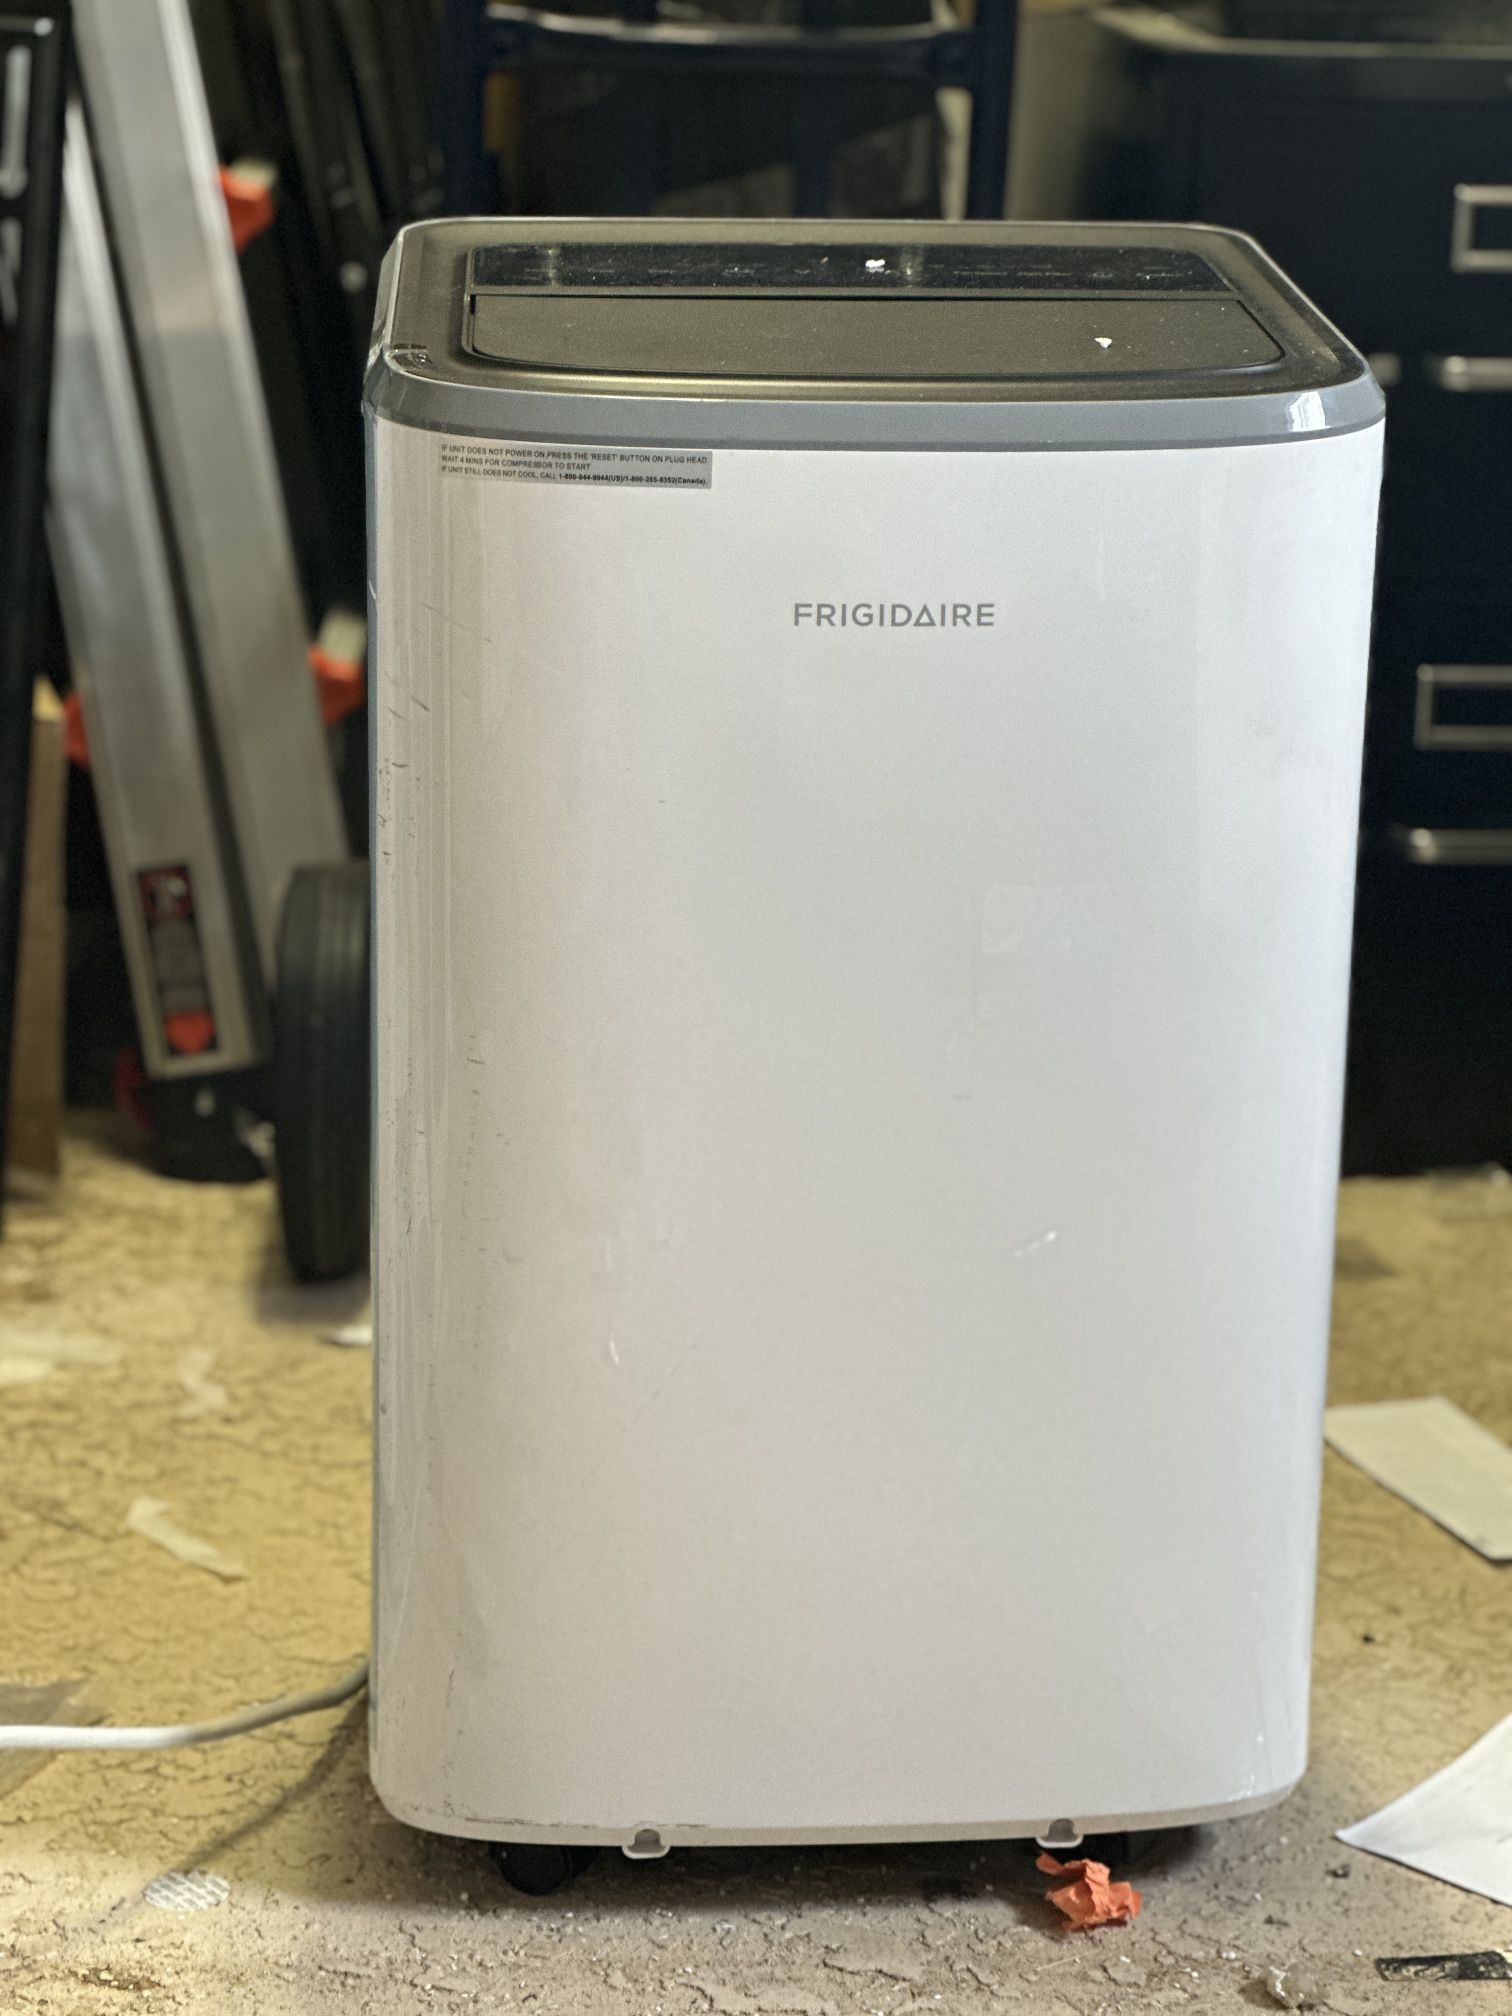 FRIGIDAIRE - PORTABLE AIR CONDITIONER BTU8K - CAPCITY 350 SQ FT.   - MODEL #H-8649 - WORKS PERFECT & IN GREAT CONDITION. 